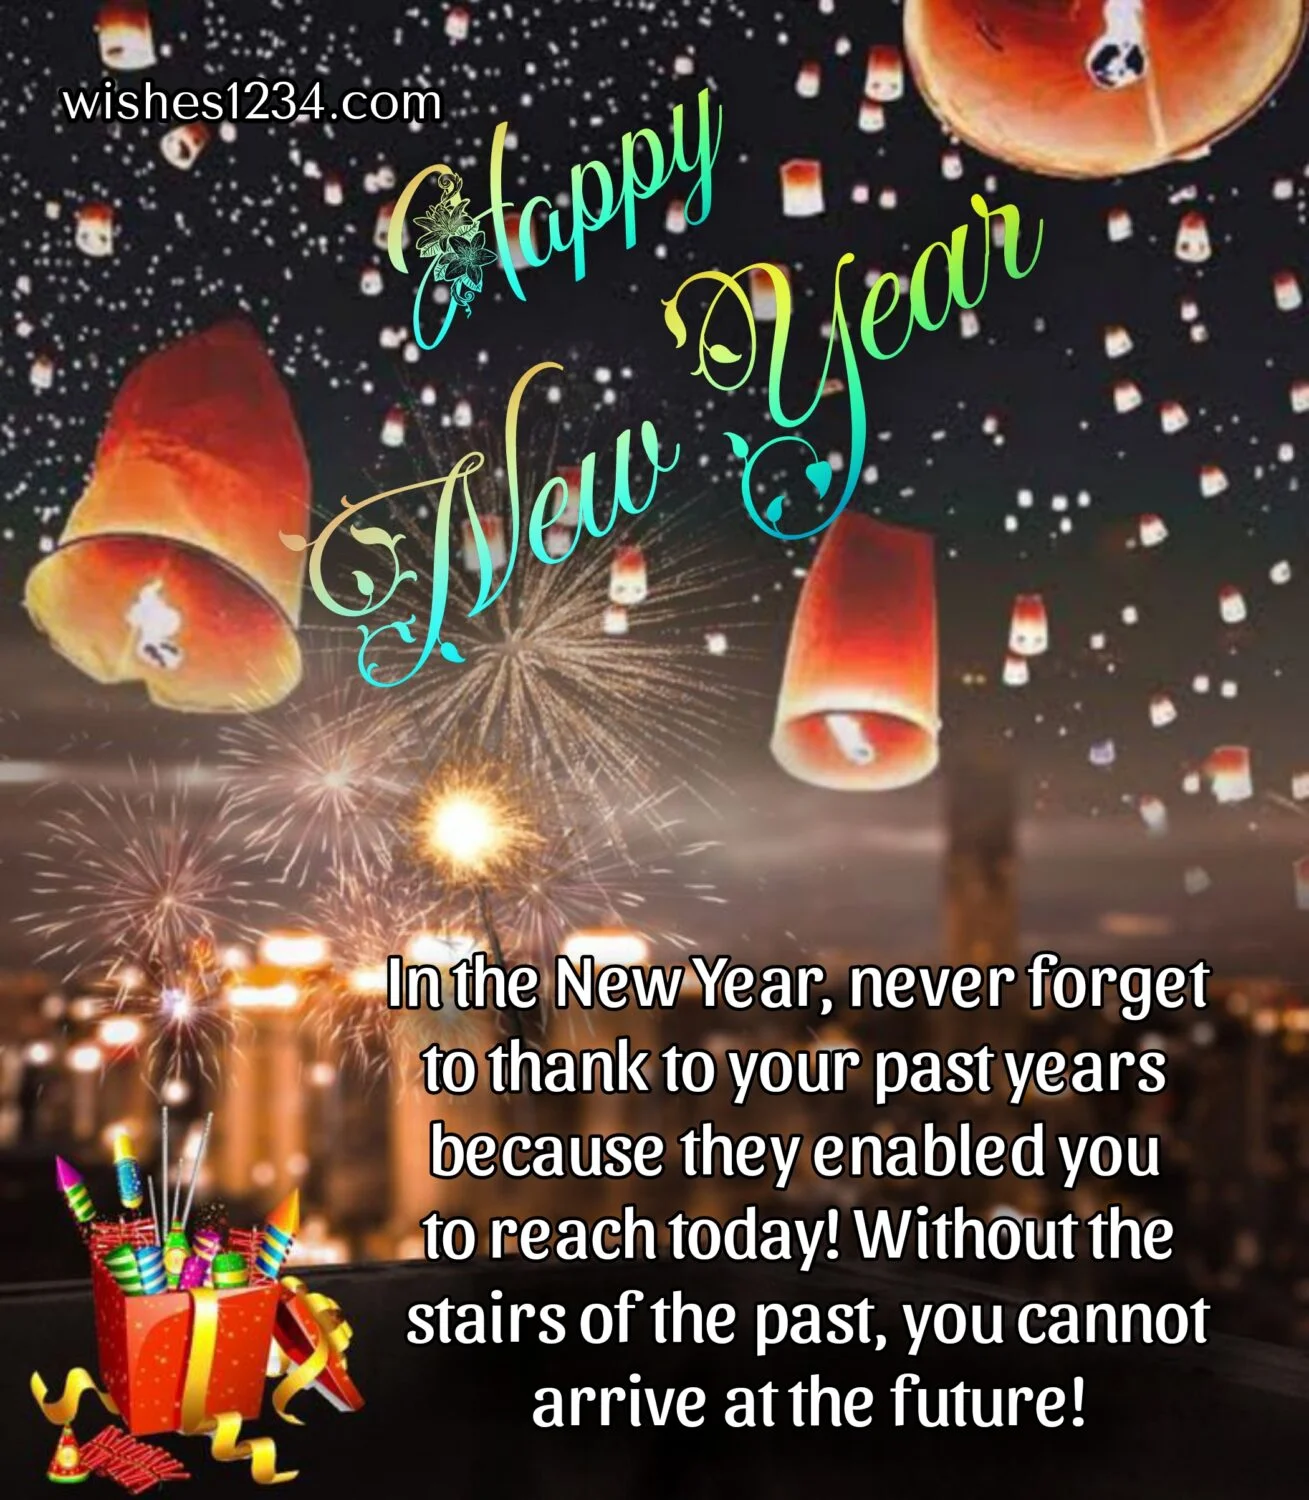 Background flying lamps images, happy new year wishes|happy new year quotes 2020